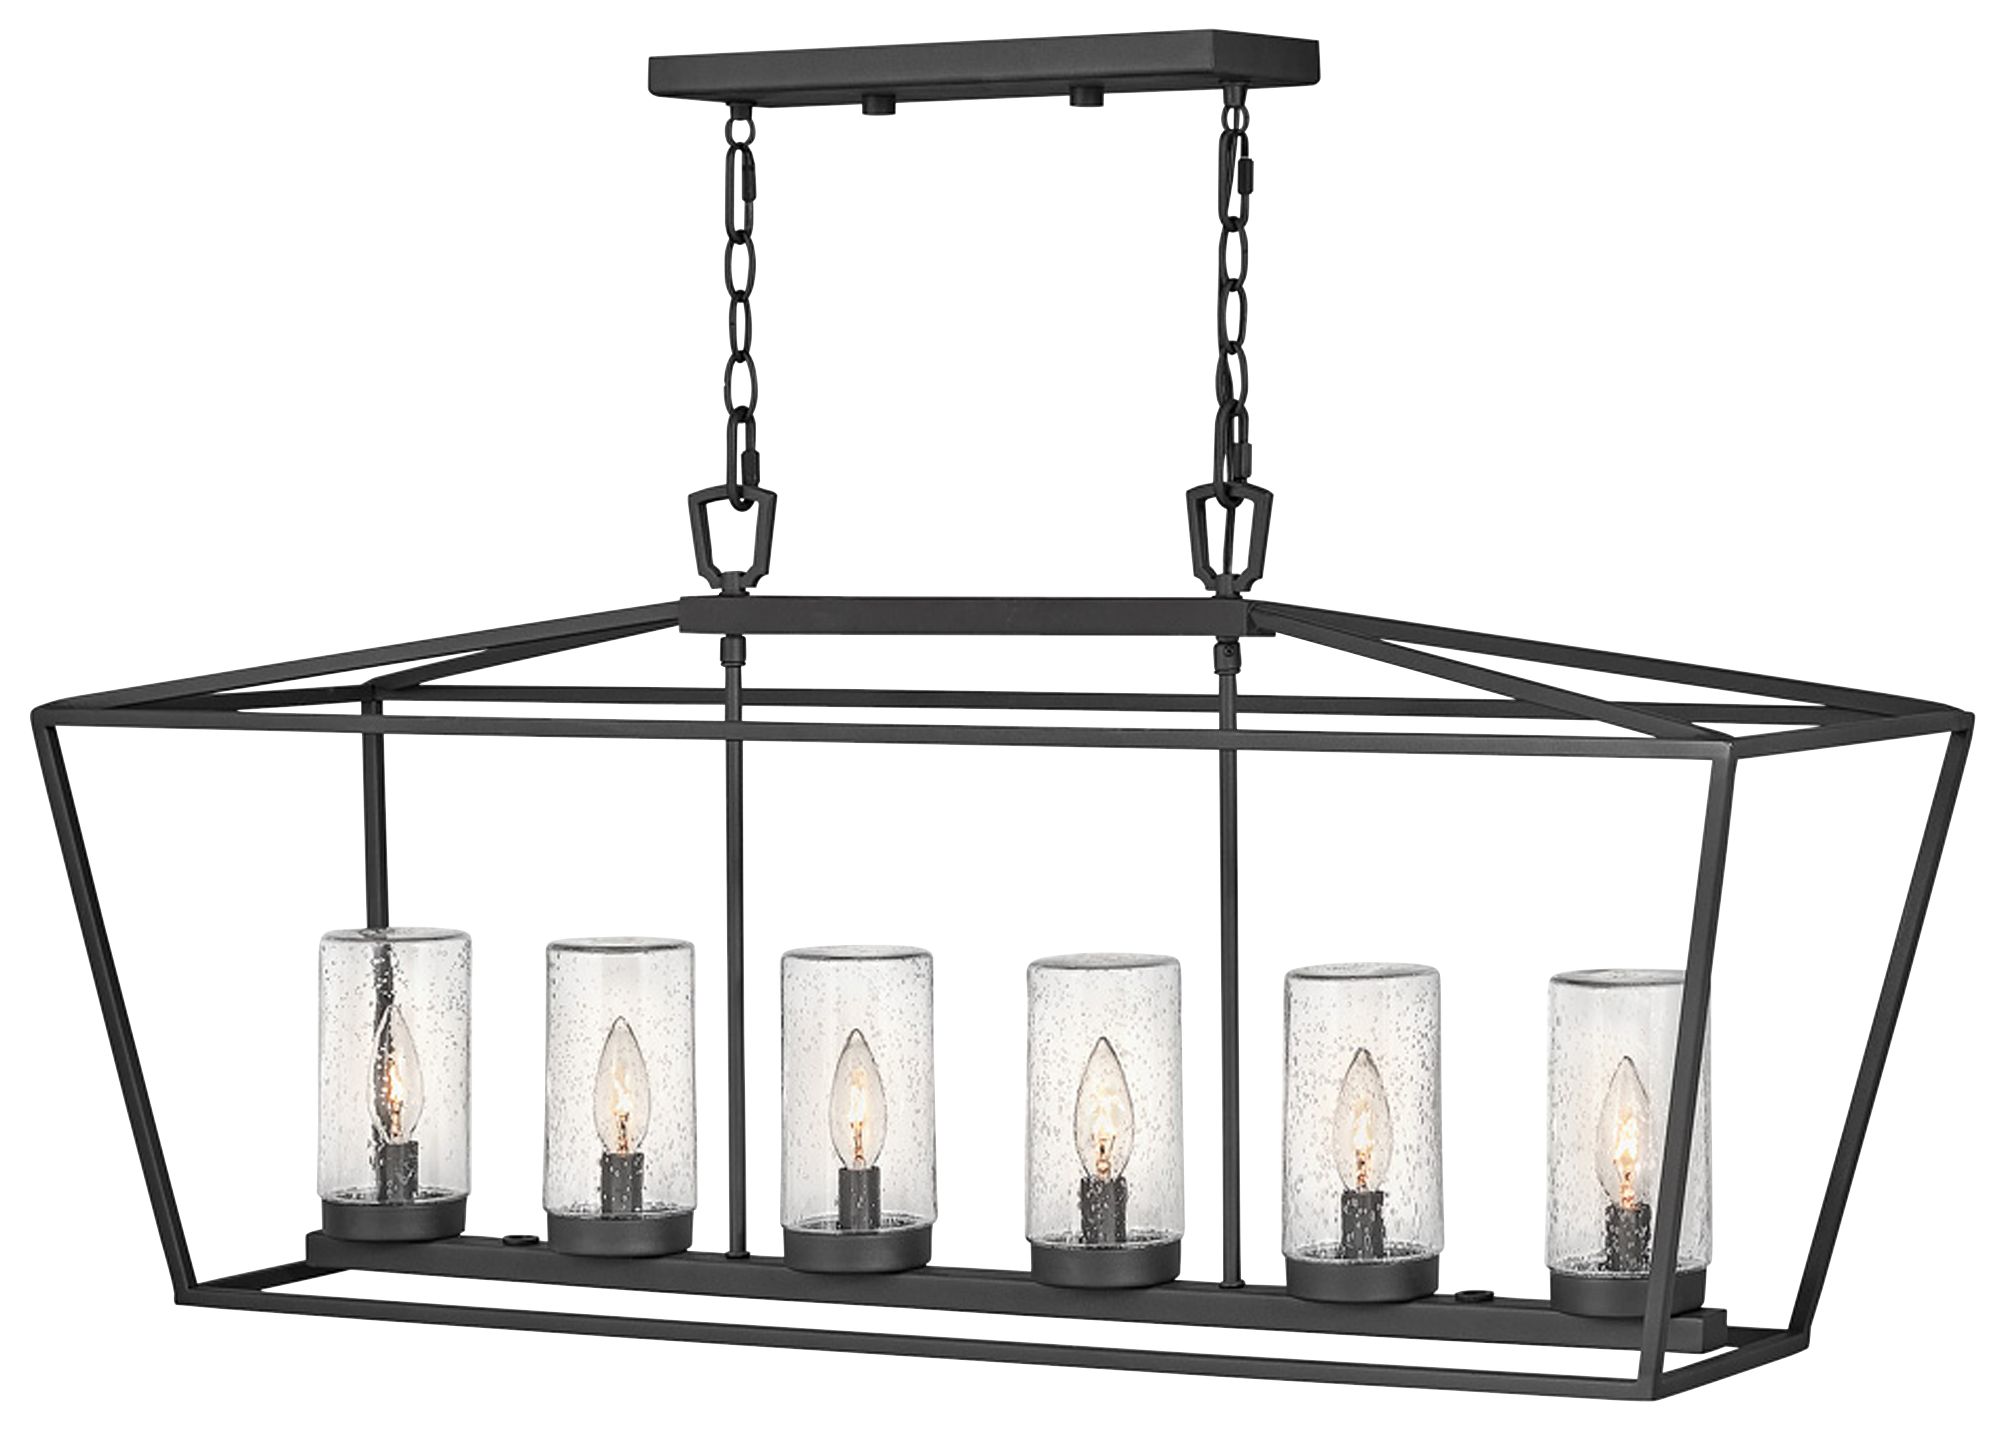 Alford Place 40" Wide 4 Watts Chandelier by Hinkley Lighting